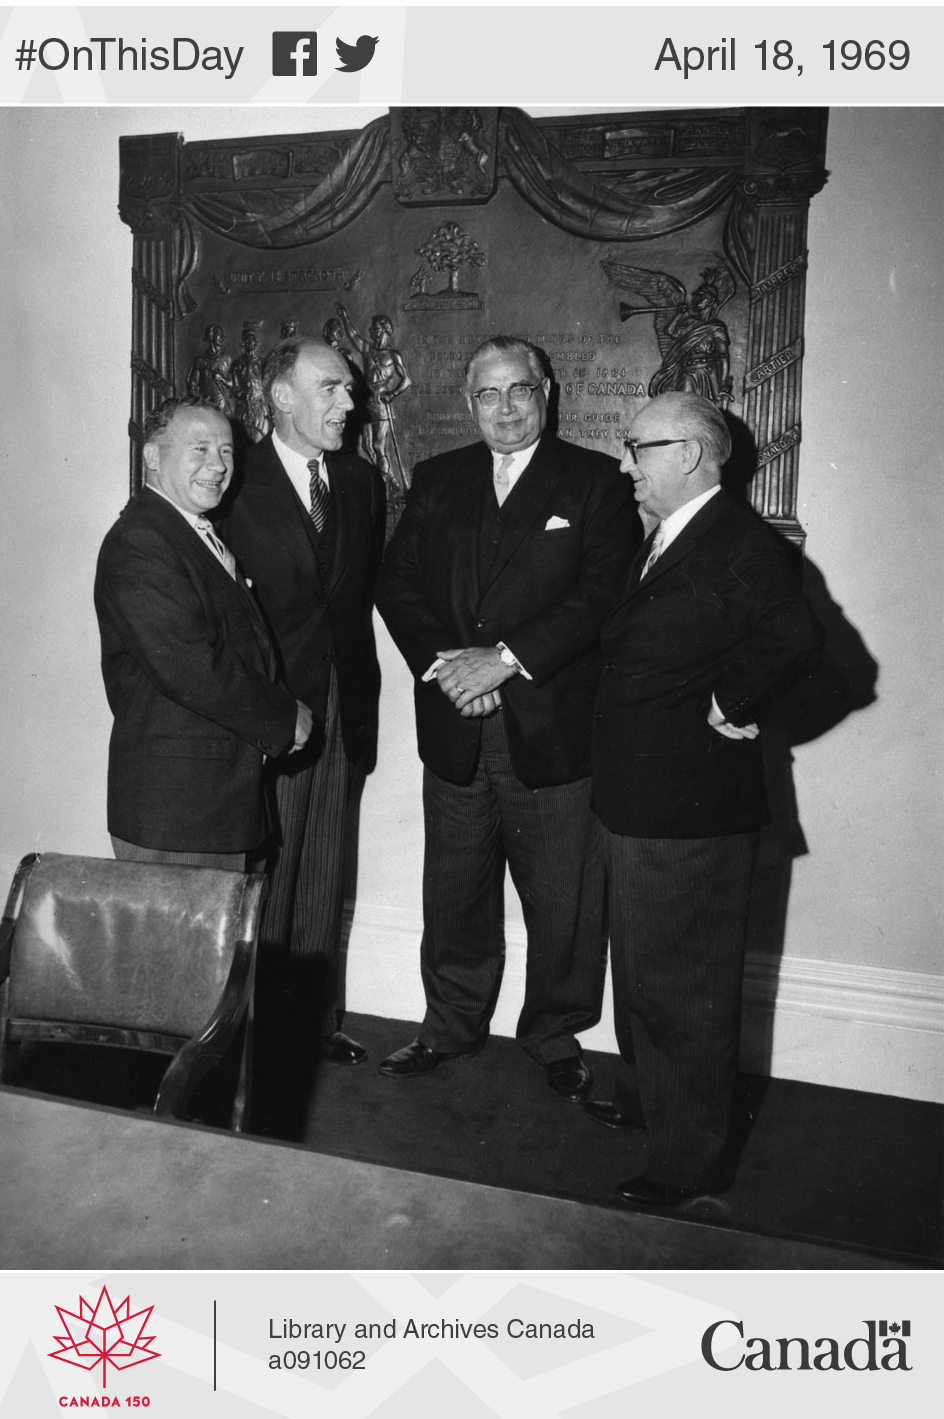 New Brunswick Premier Louis J. Robichaud (first from left) poses with his counterparts Robert Stanfield (Nova Scotia), Walter R. Shaw (Prince Edward Island) and Joey Smallwood (Newfoundland) at the Centennial of the Charlottetown Conference, 1964.